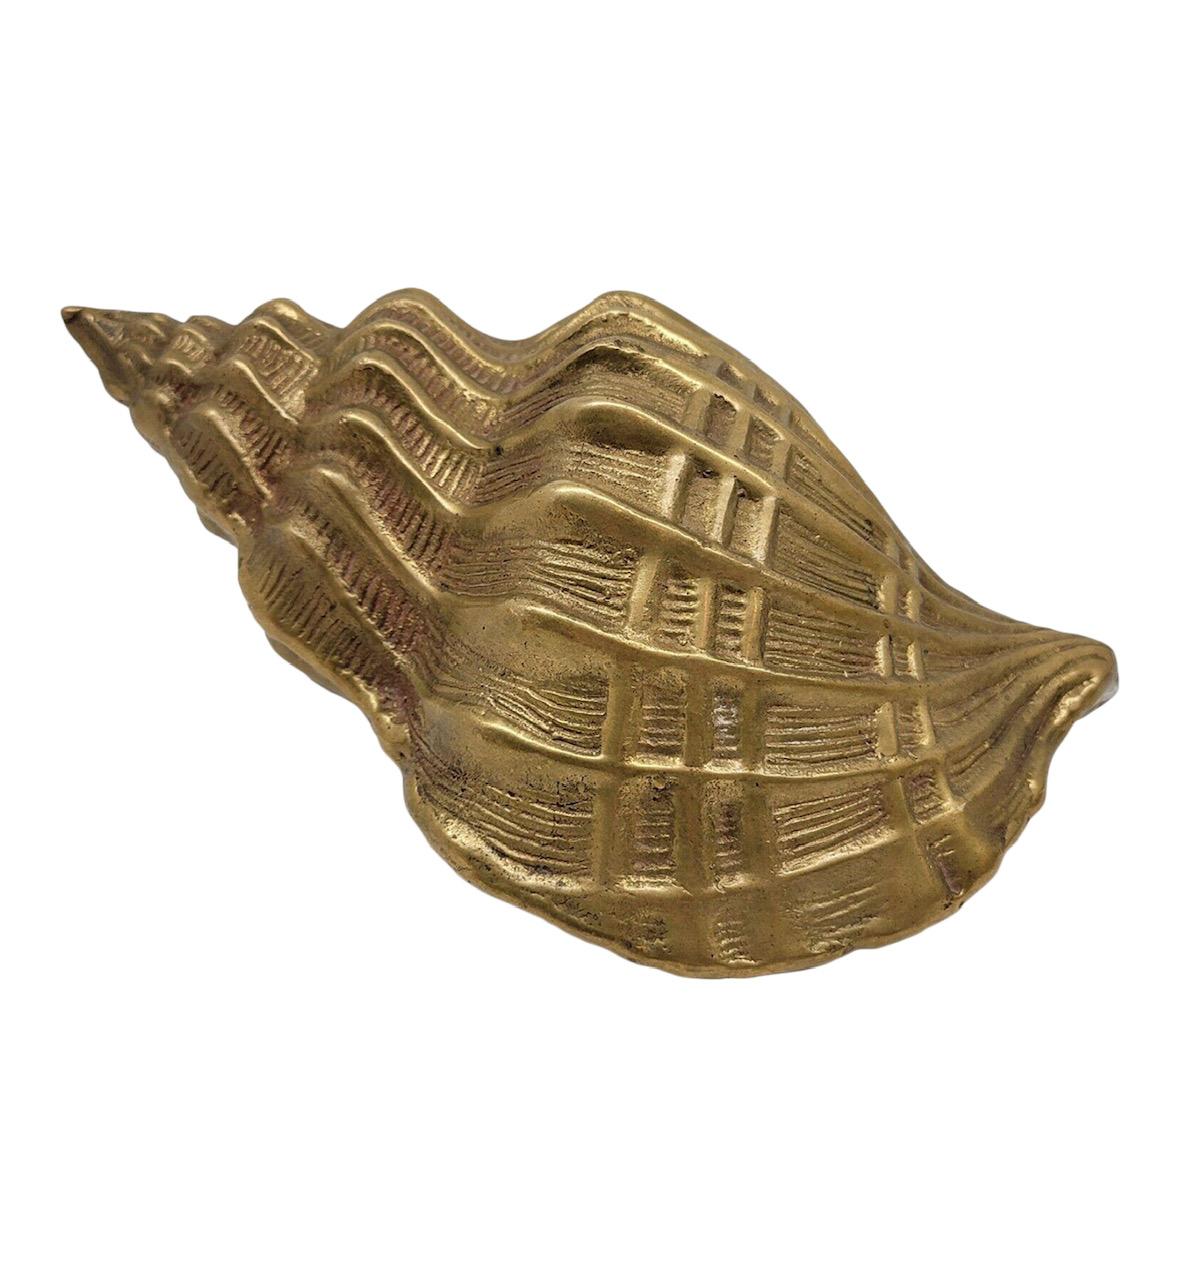 https://tookeybuxton.com/wp-content/uploads/2023/03/Vintage-Brass-Nautical-Conch-Seashell-Paperweight-7.jpg